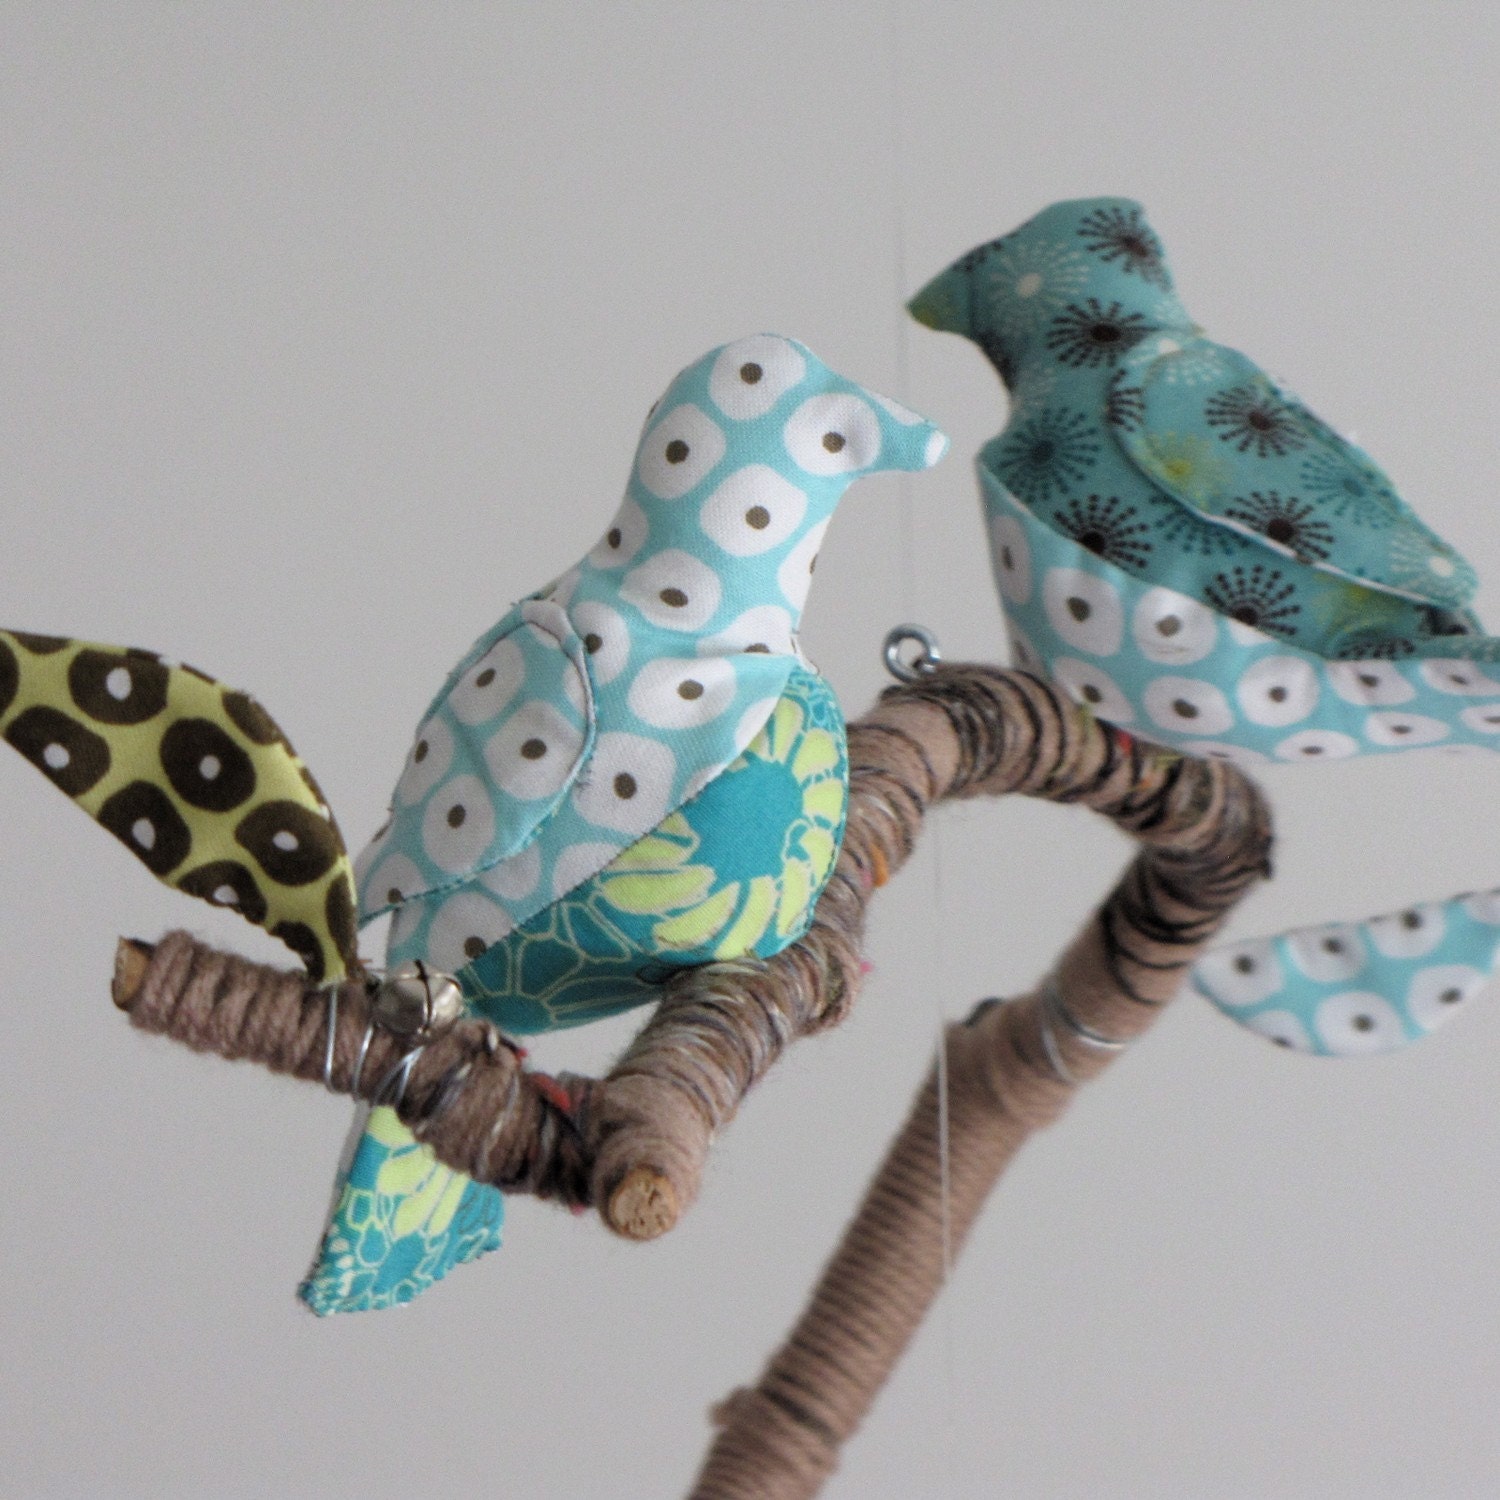 CUSTOM 5 little birds fly away home - fabric mobile on yarn wrapped branches